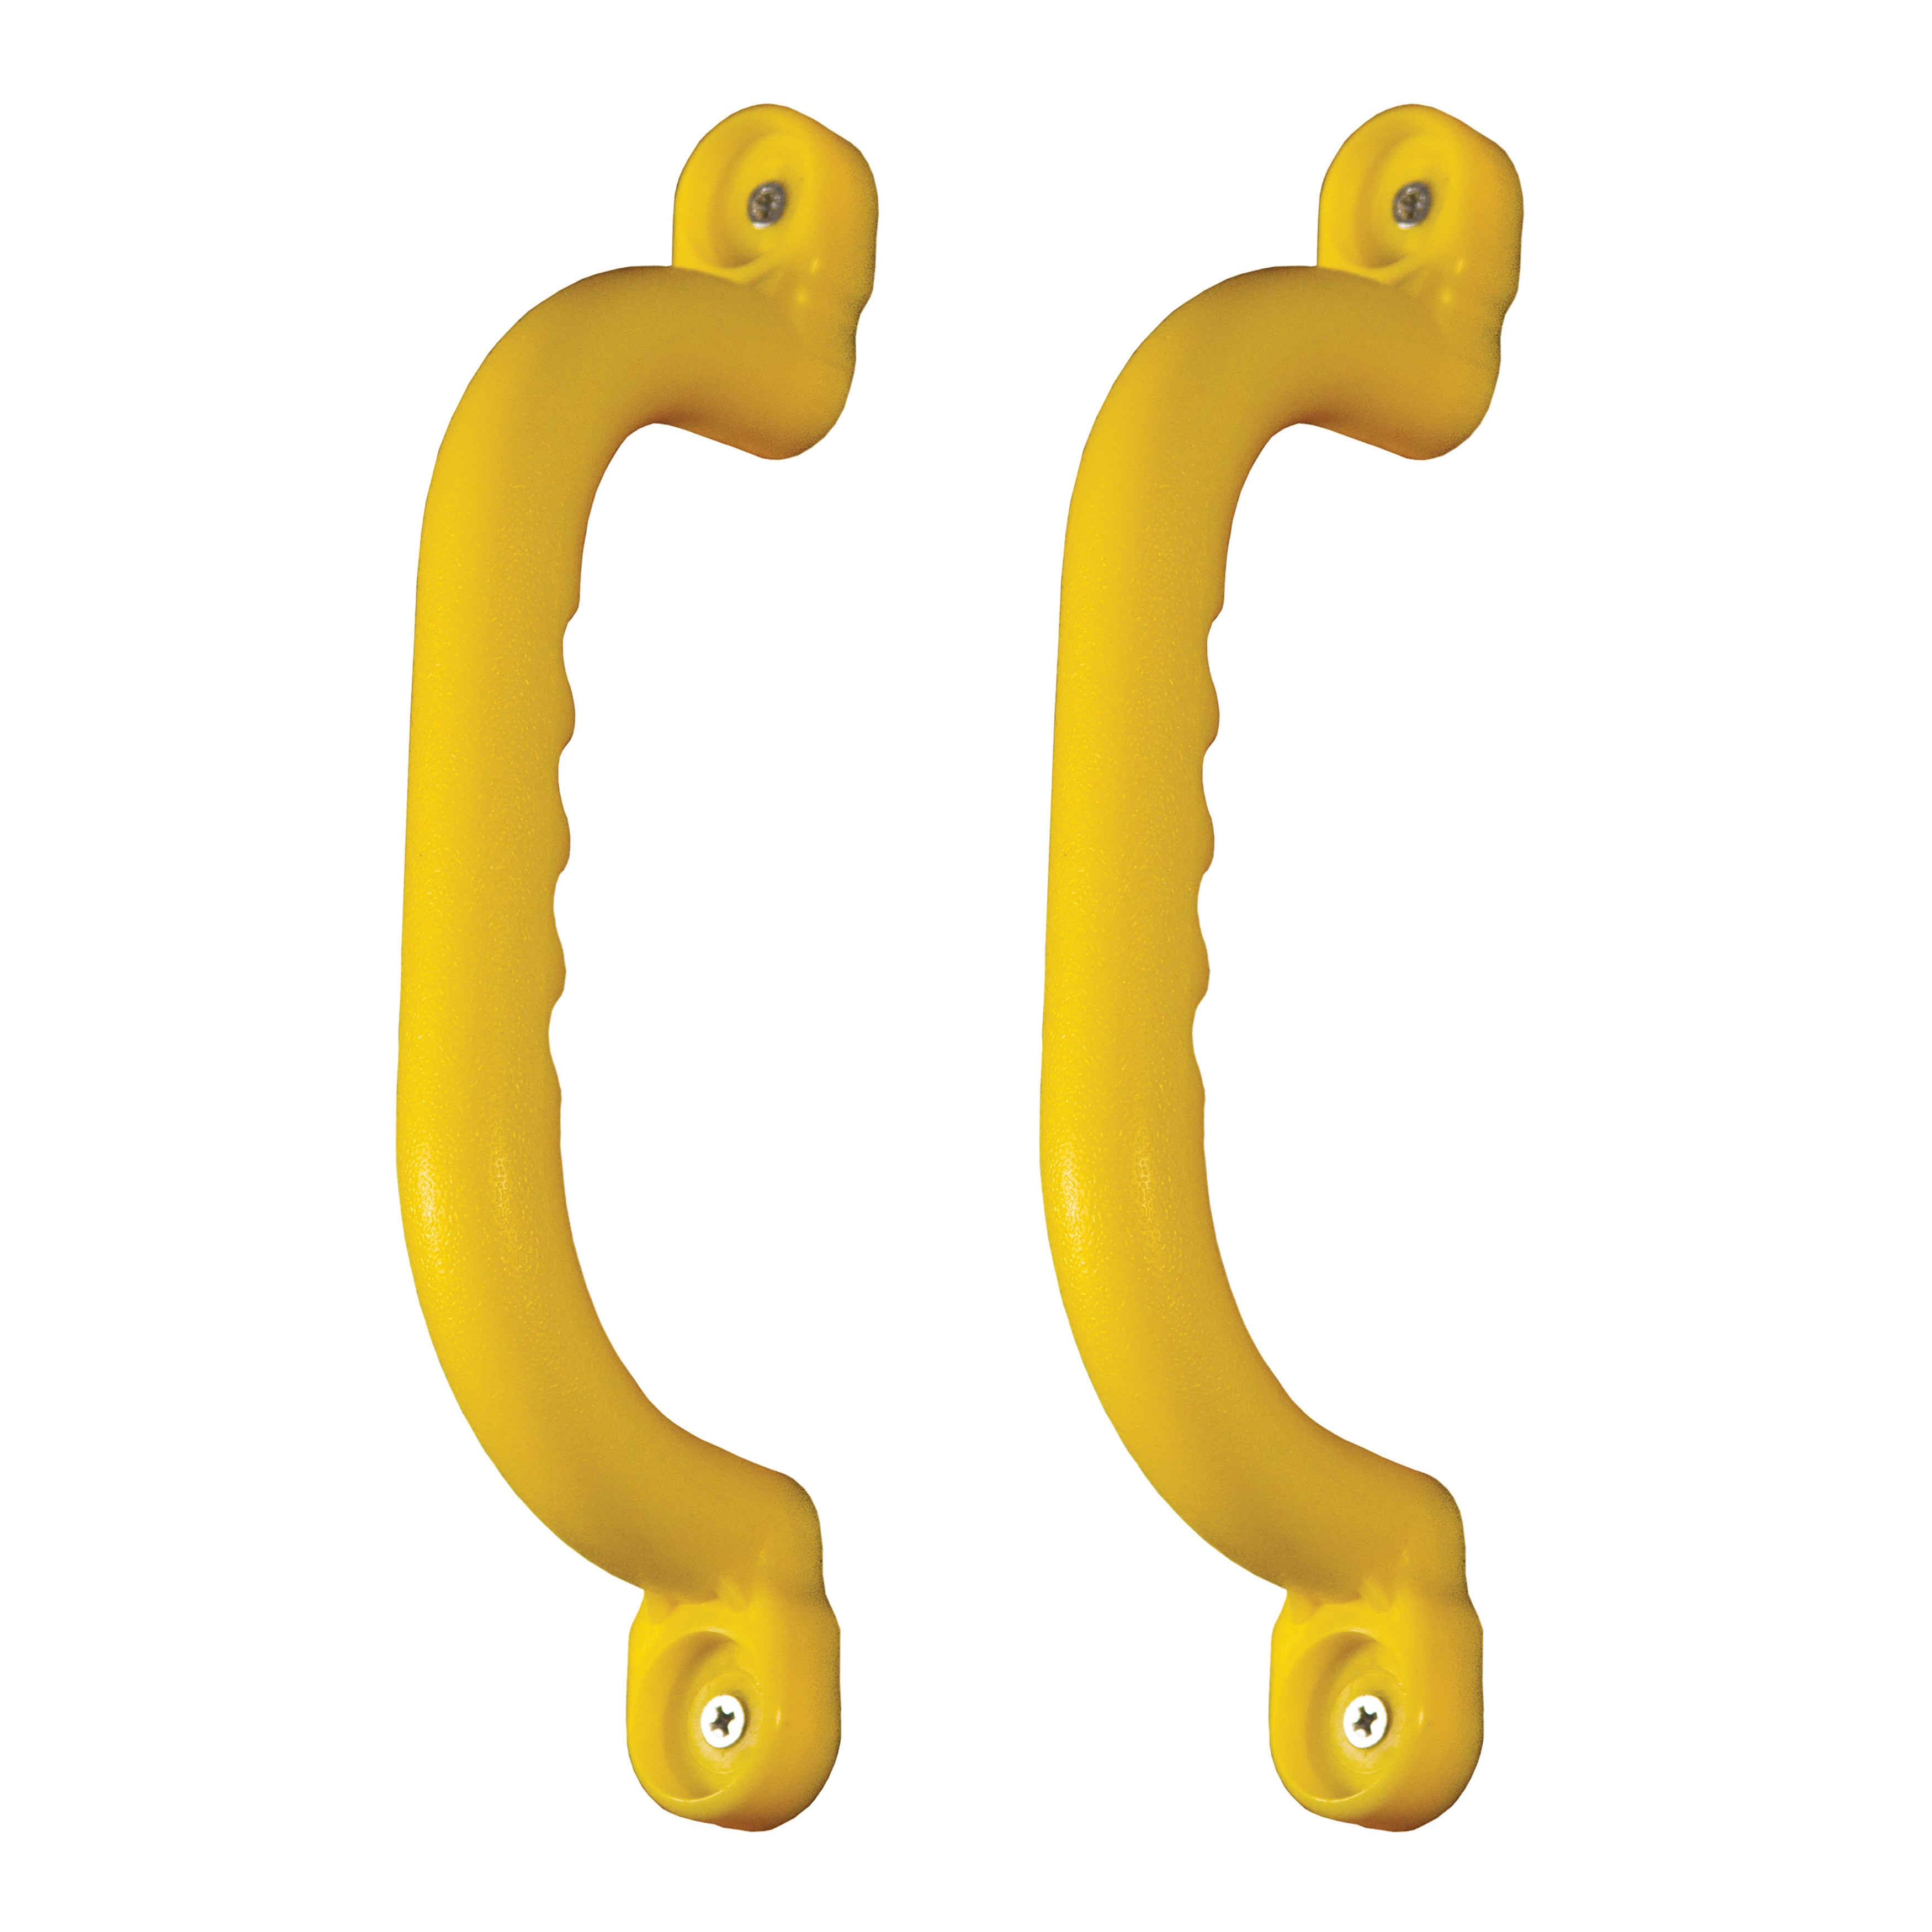 Safety Handle Grips for Wood Swing Set | WillyGoat Playground & Park Equipment